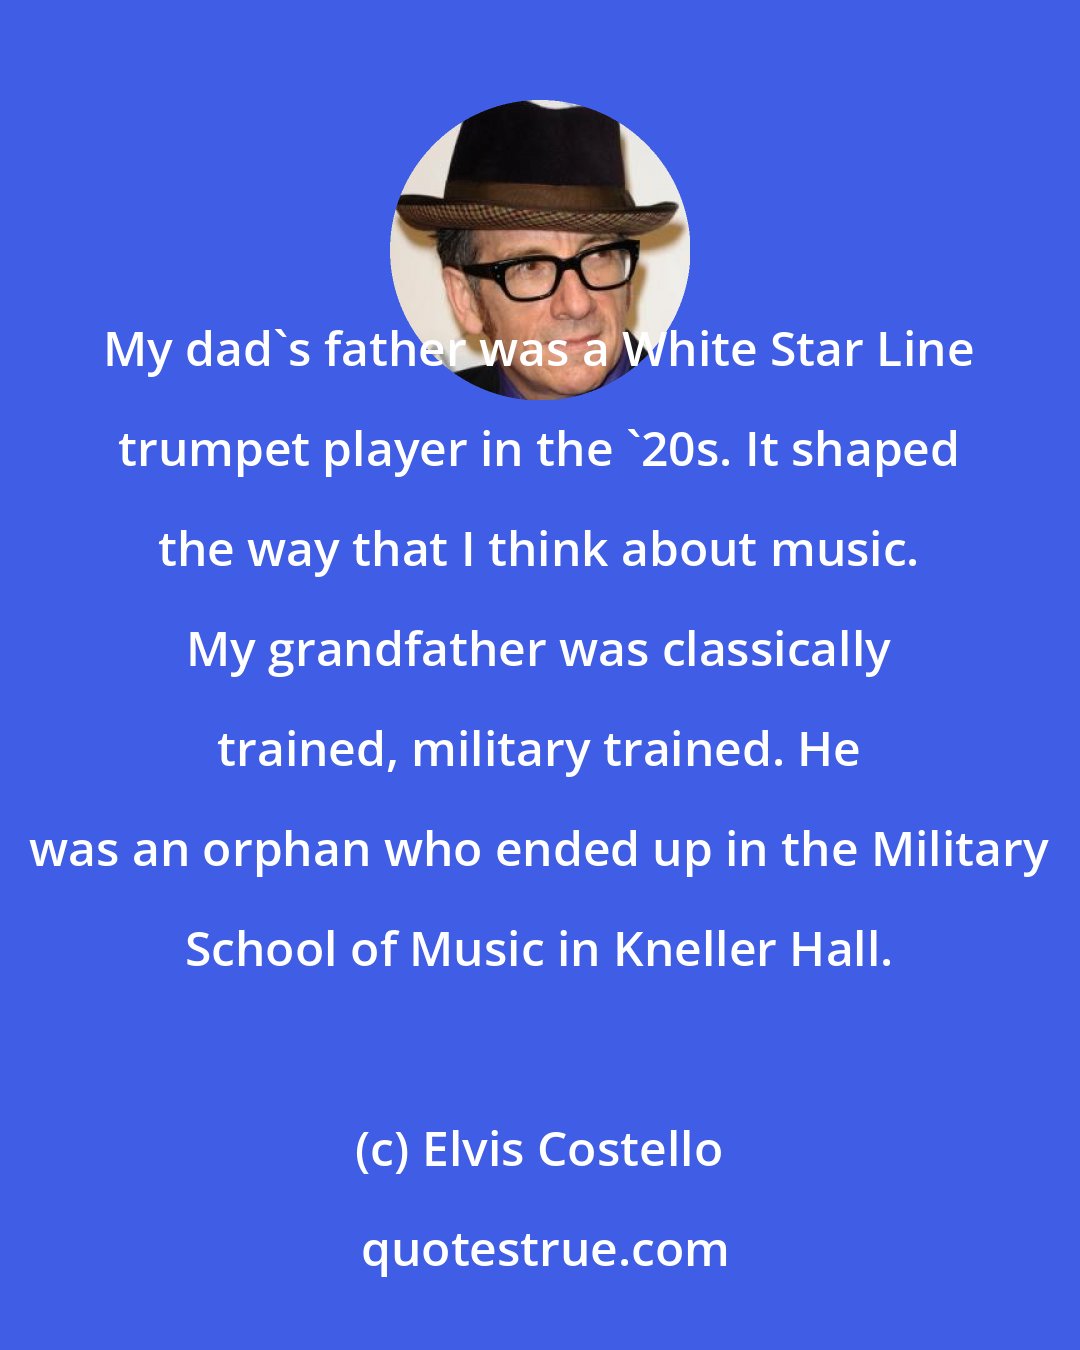 Elvis Costello: My dad's father was a White Star Line trumpet player in the '20s. It shaped the way that I think about music. My grandfather was classically trained, military trained. He was an orphan who ended up in the Military School of Music in Kneller Hall.